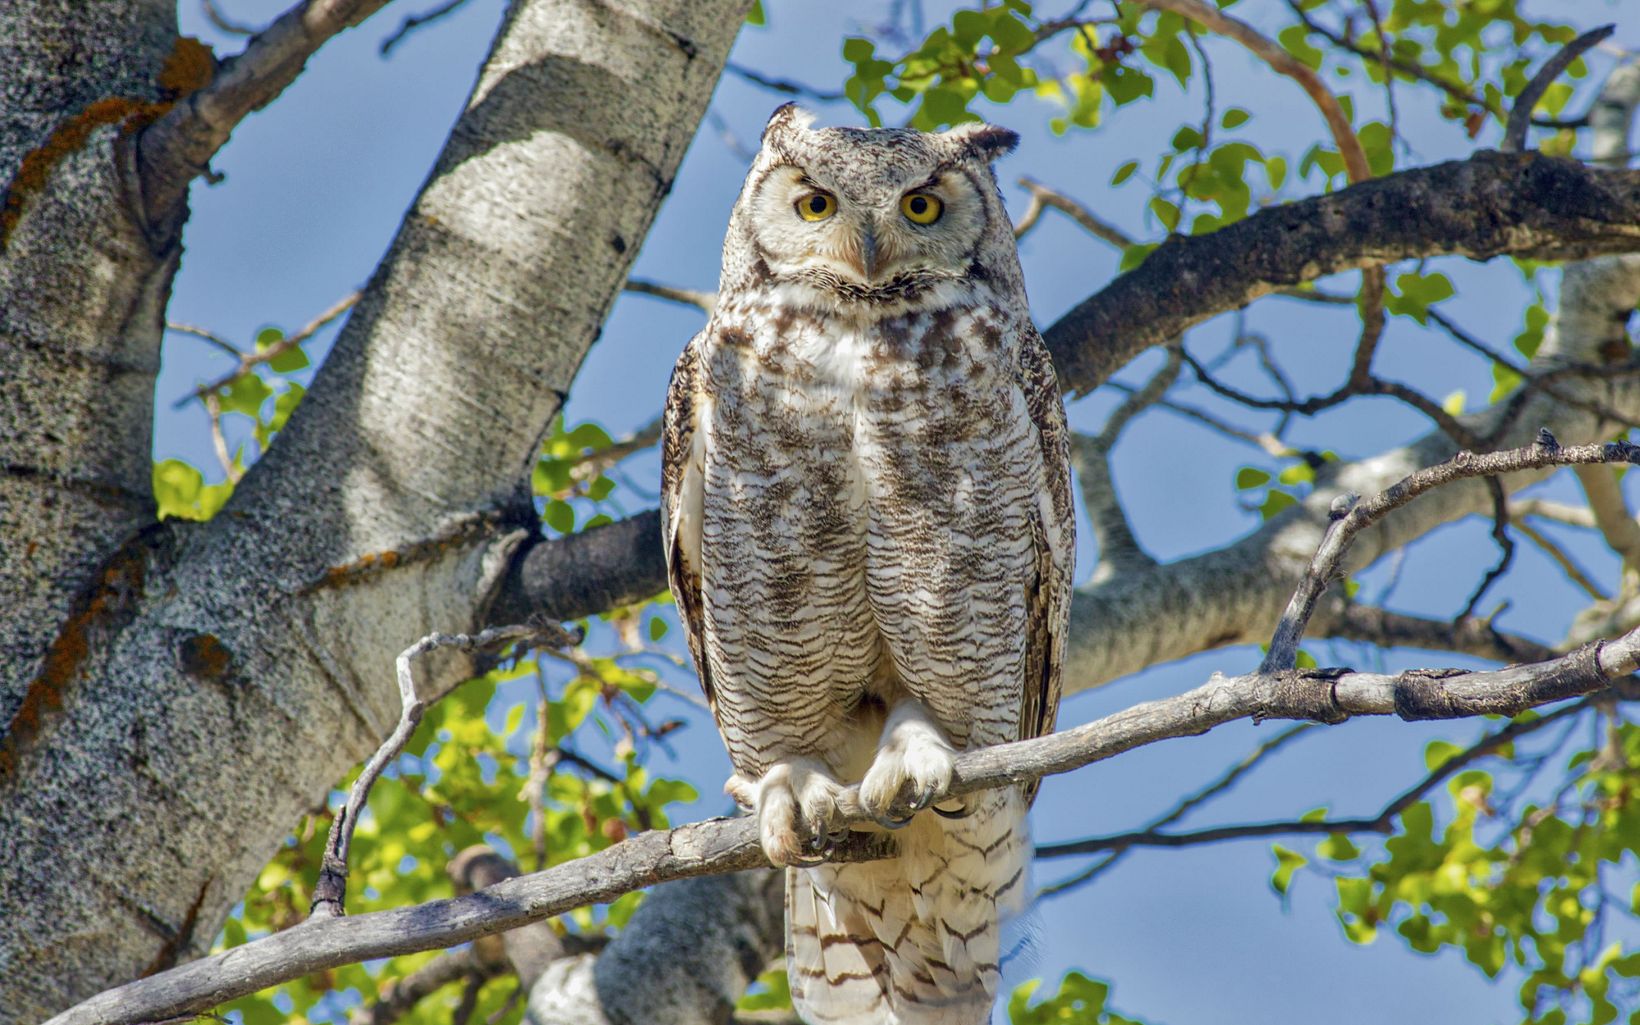 A large brown and white owl perched on a tree branch.